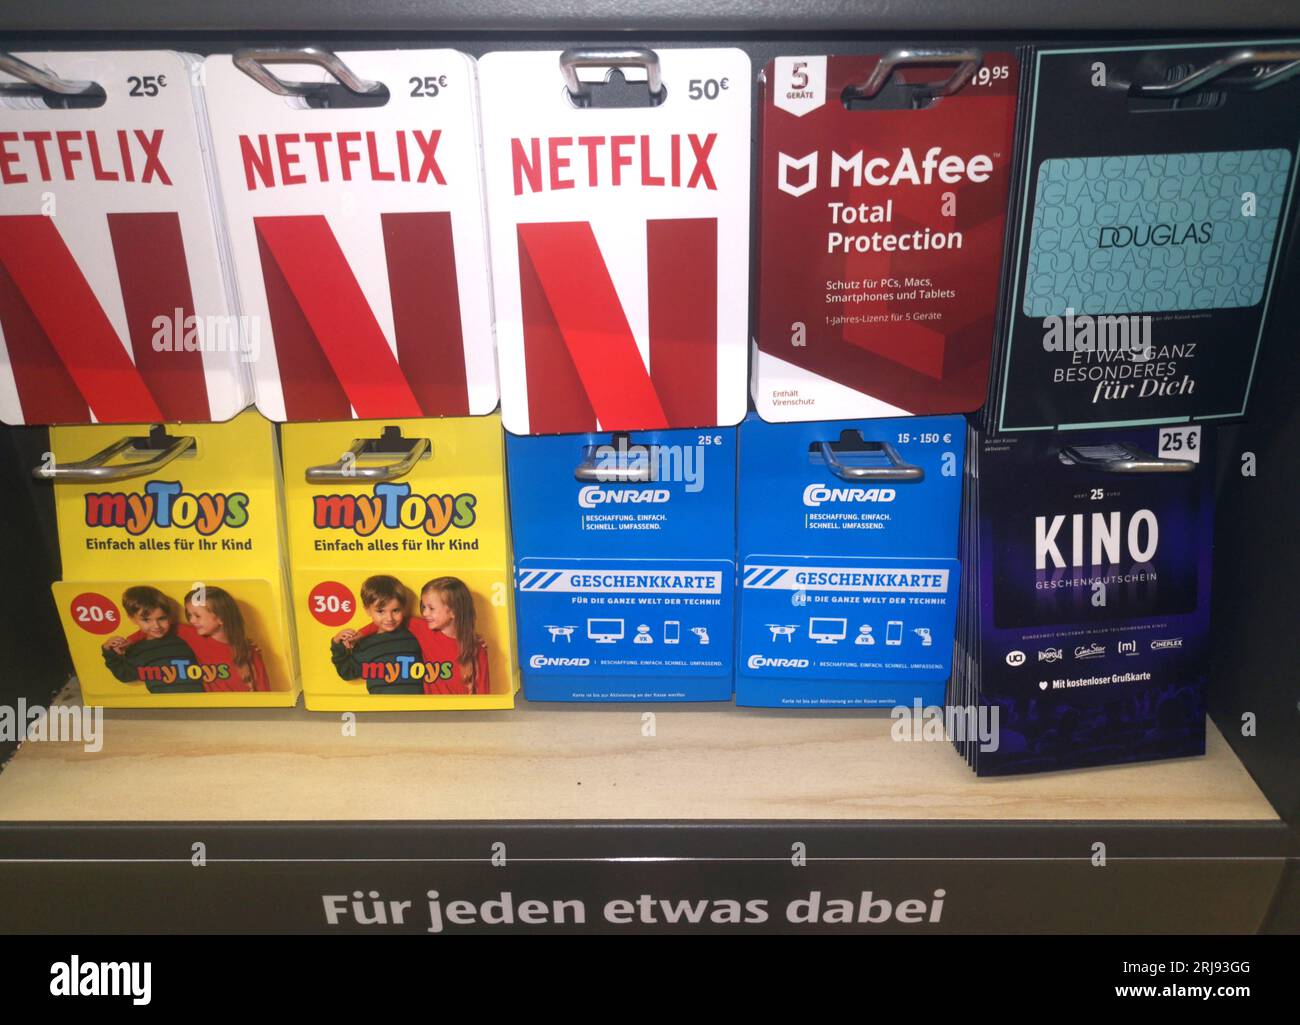 WETZLAR, HESSE, GERMANY 03-14-2022: Netflix, McAfee, Douglas, myToys, and Conrad gift cards for sale on a display rack ready for purchase Stock Photo